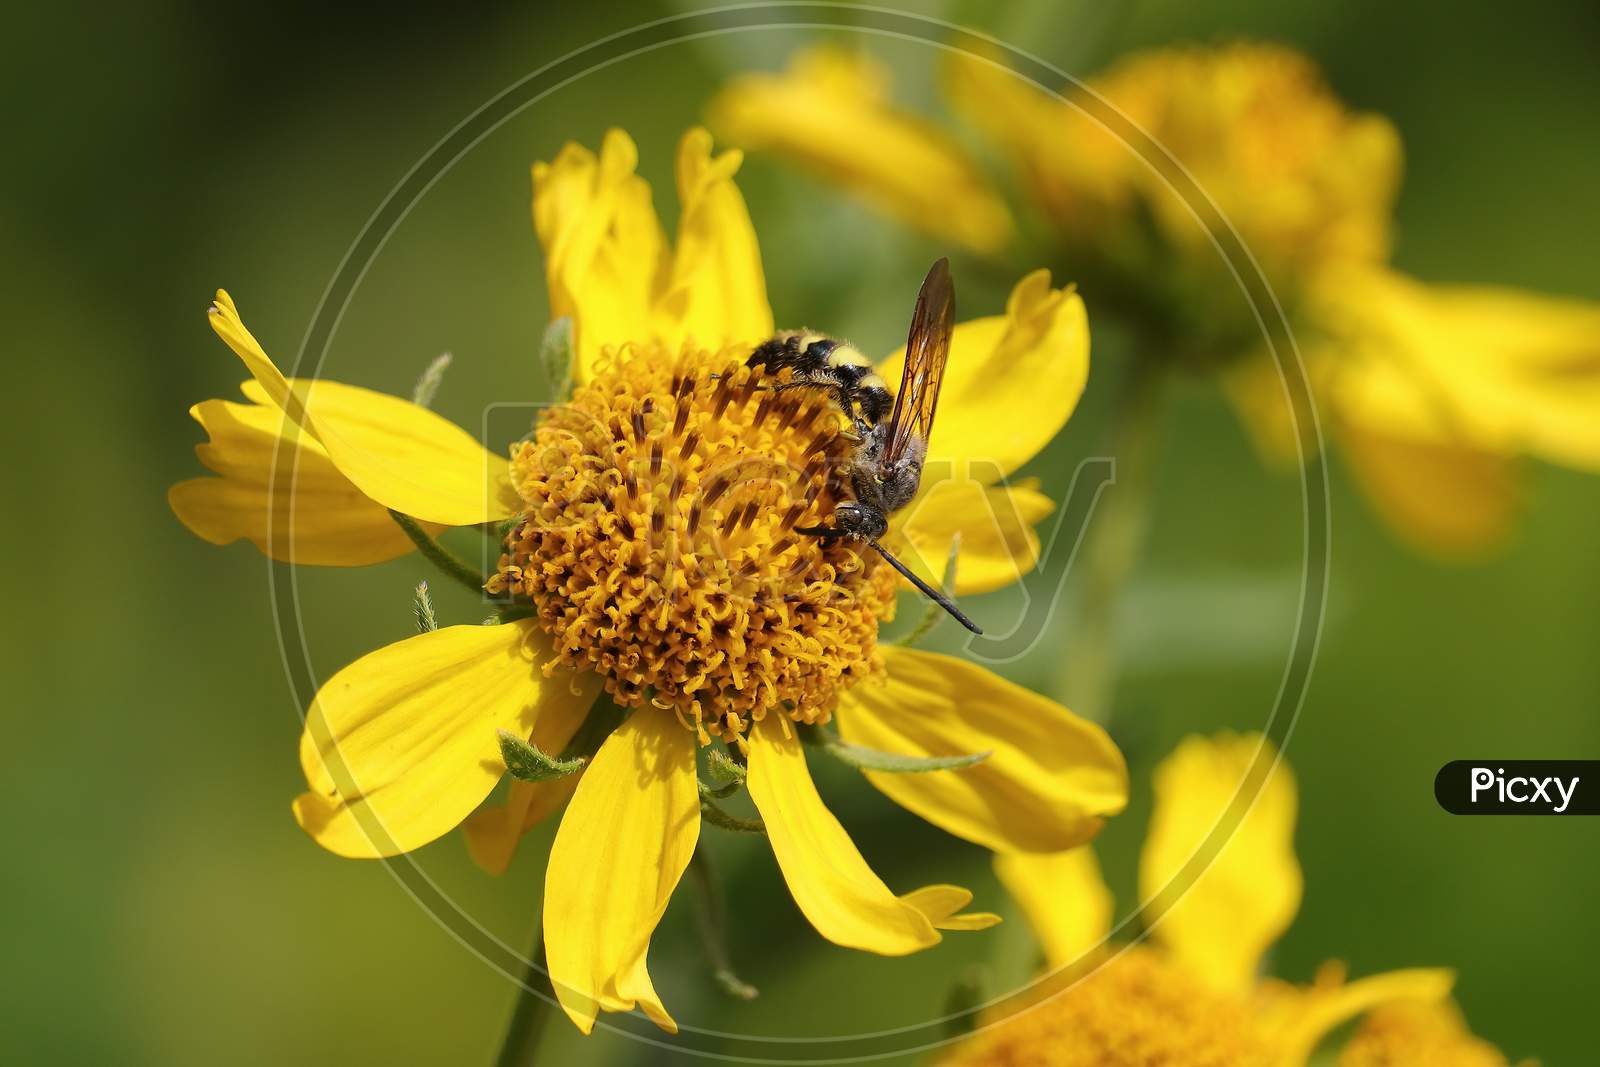 garden wasp collecting pollen on yellow flower closeup view